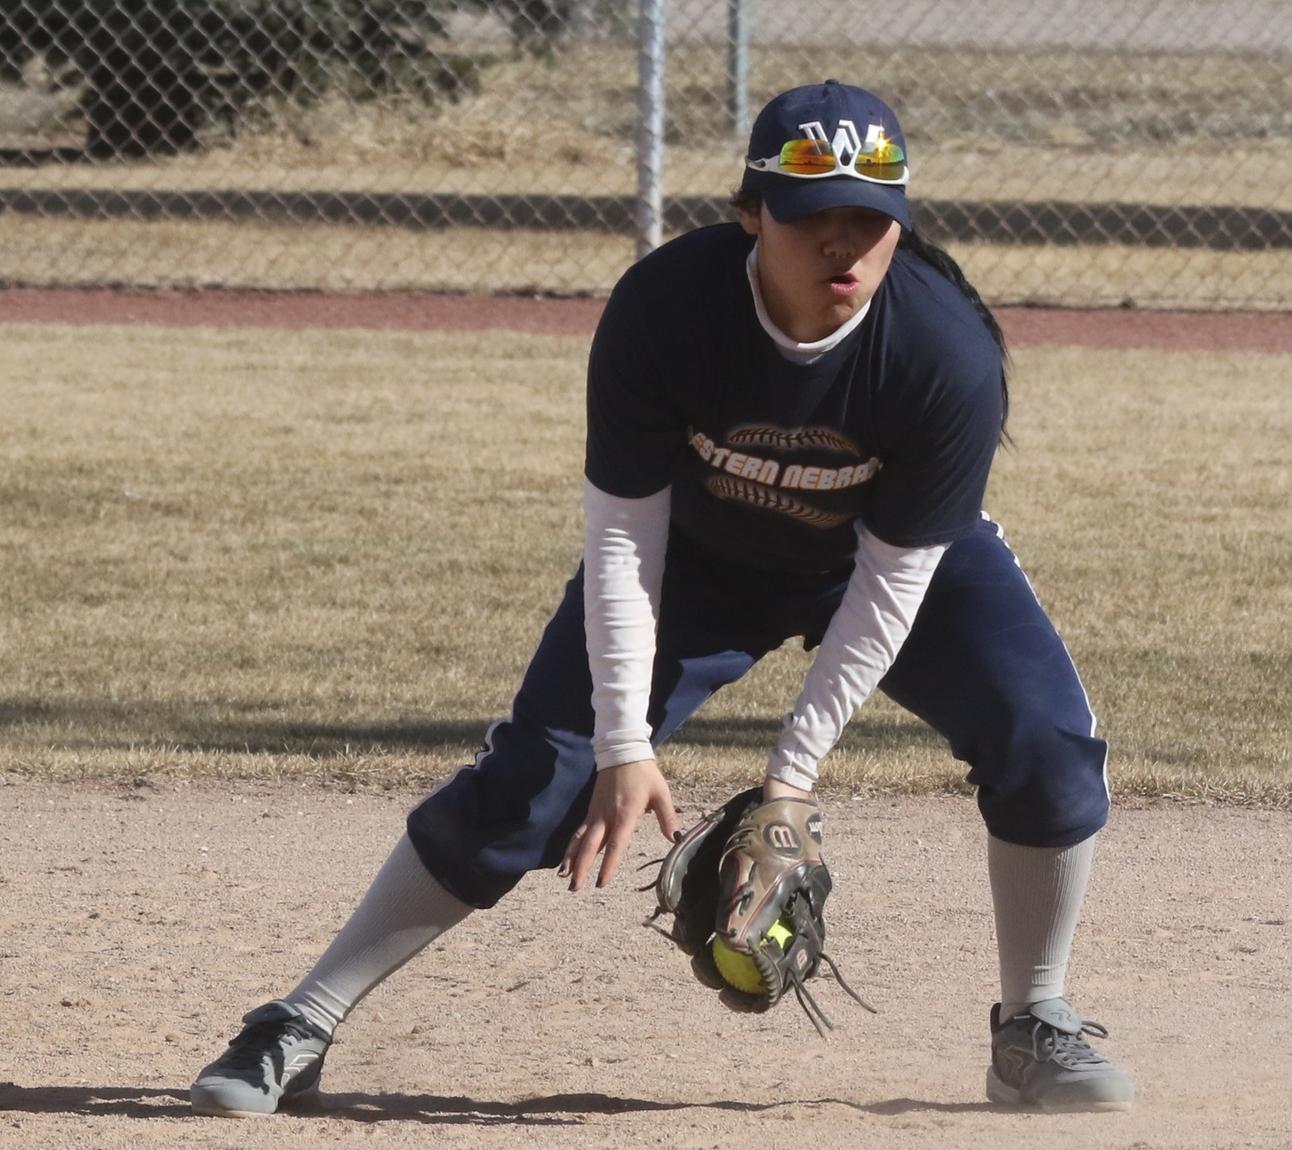 WNCC scores 31 runs in sweep over Trinidad